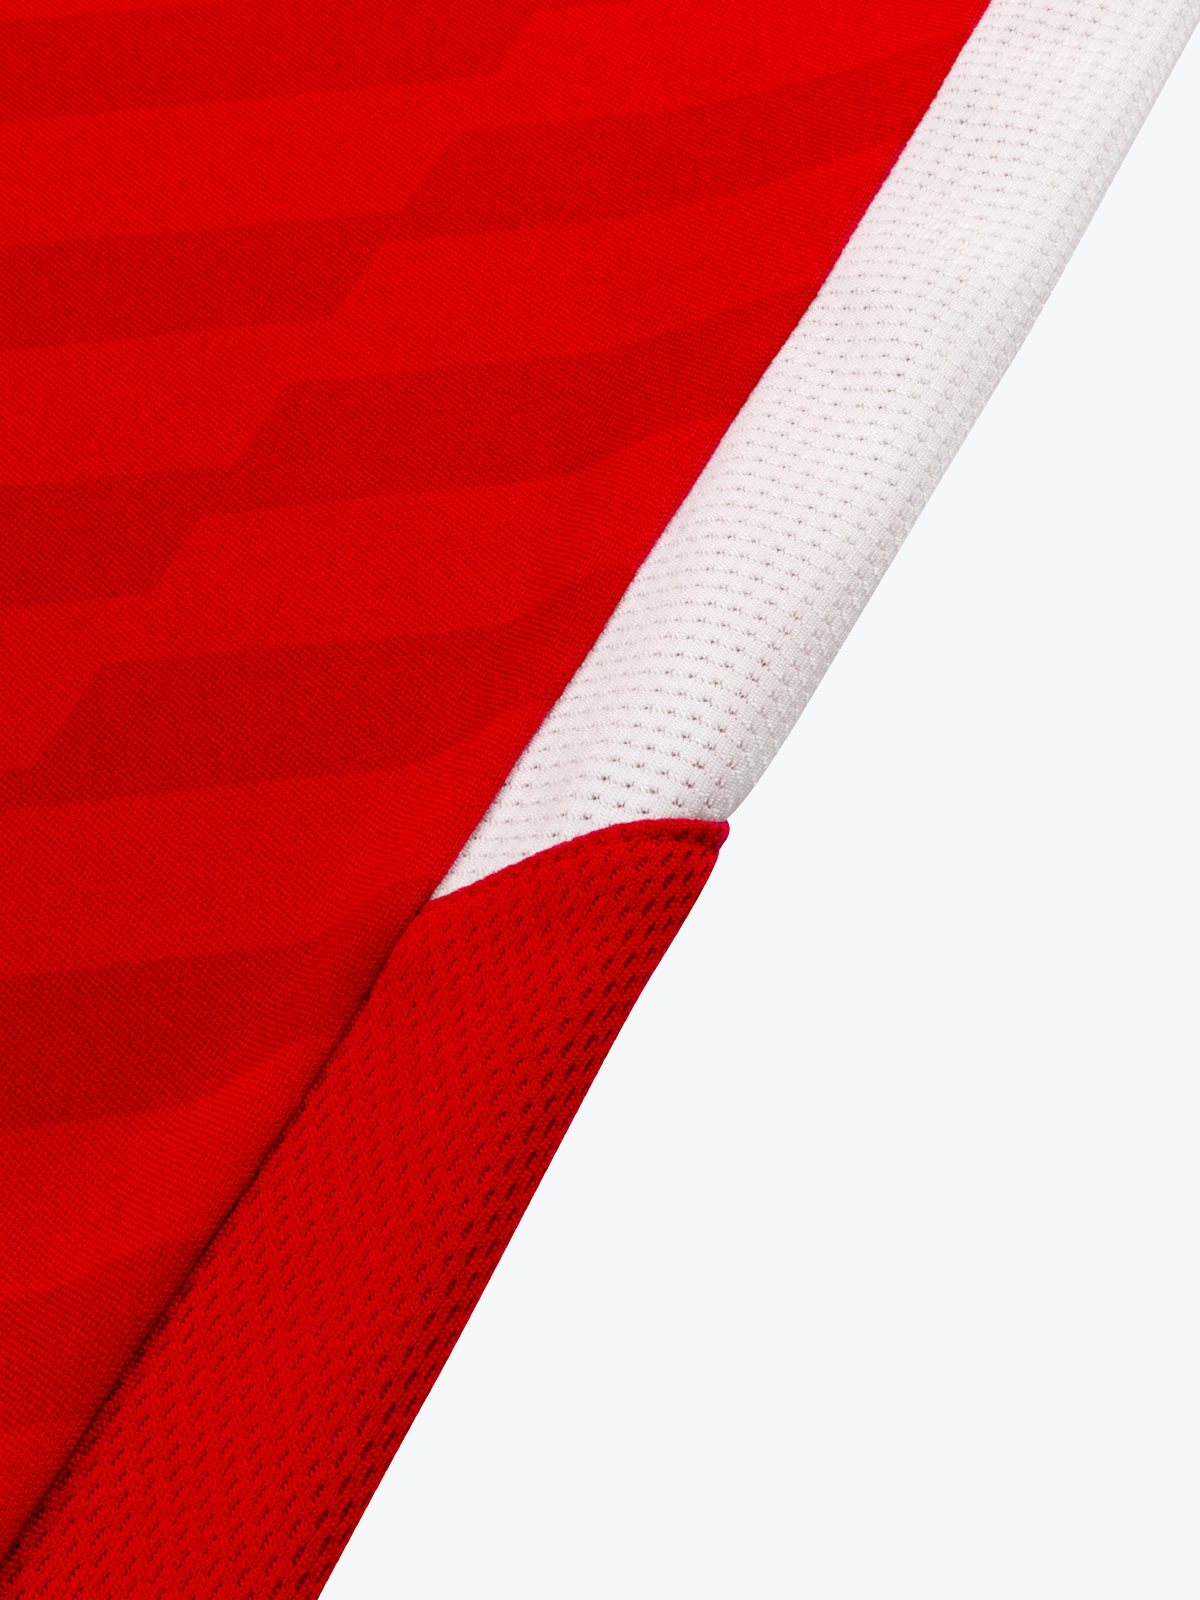 picture of evolve pro 3 jersey - red